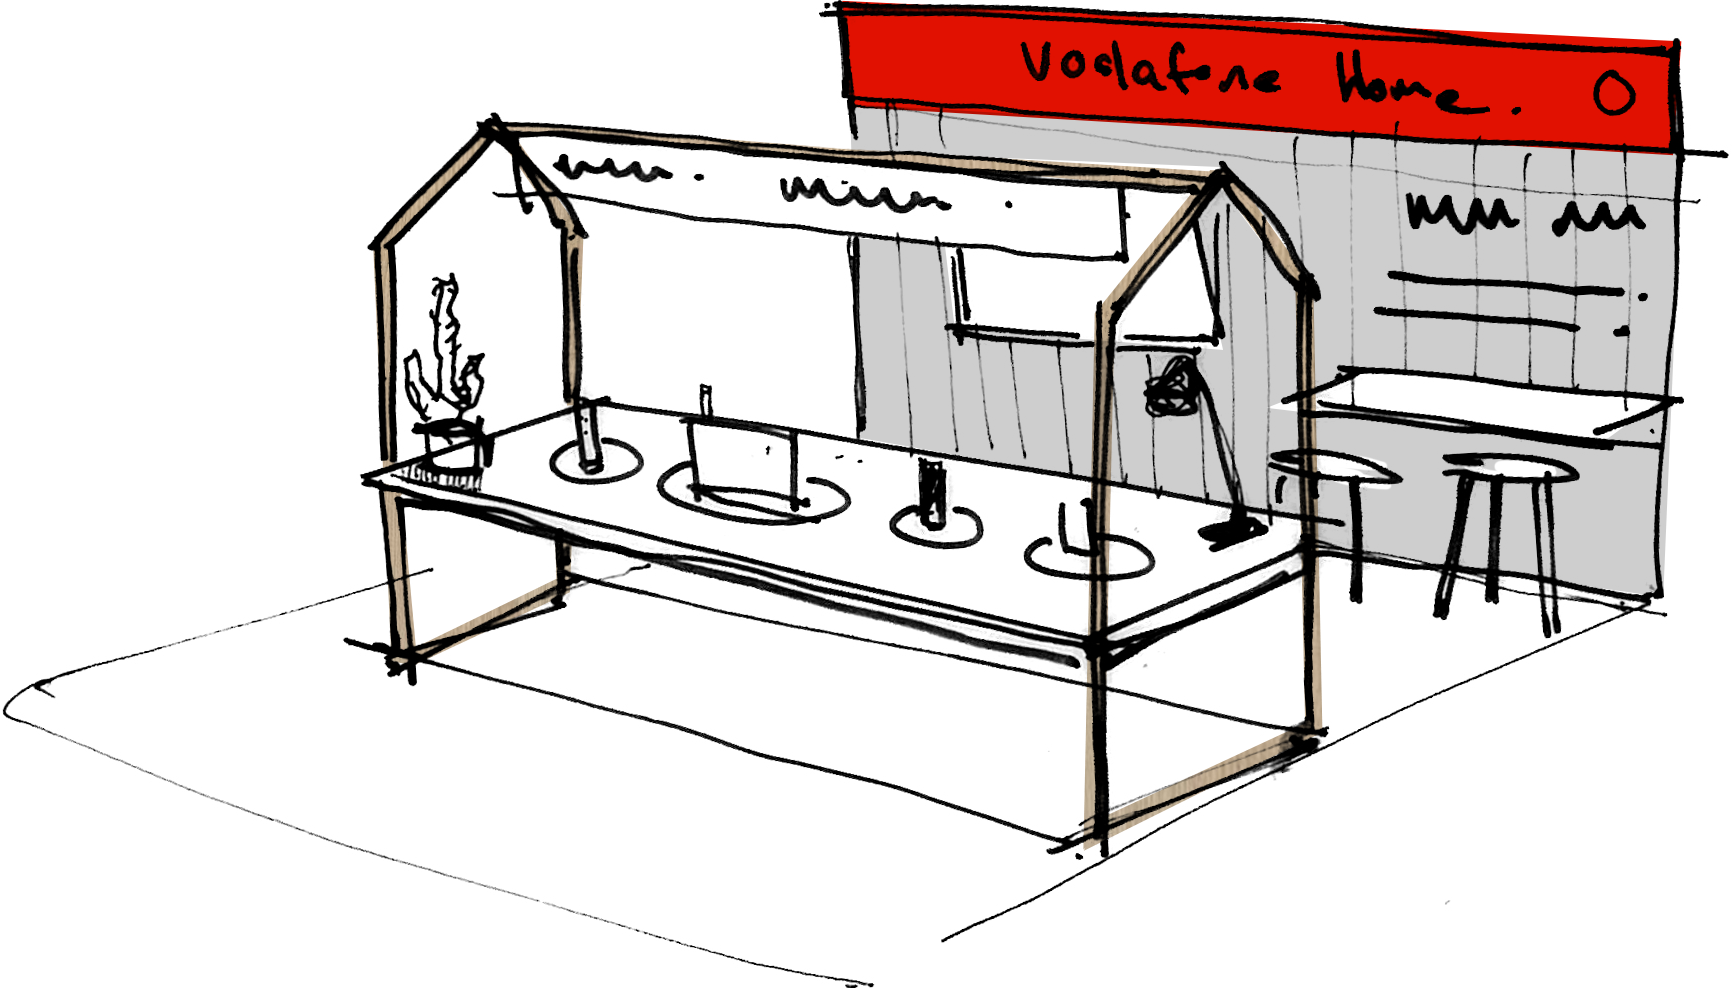 Interior sketch visual of Vodafone Quad Play, Retail Store and Service Design by Household.